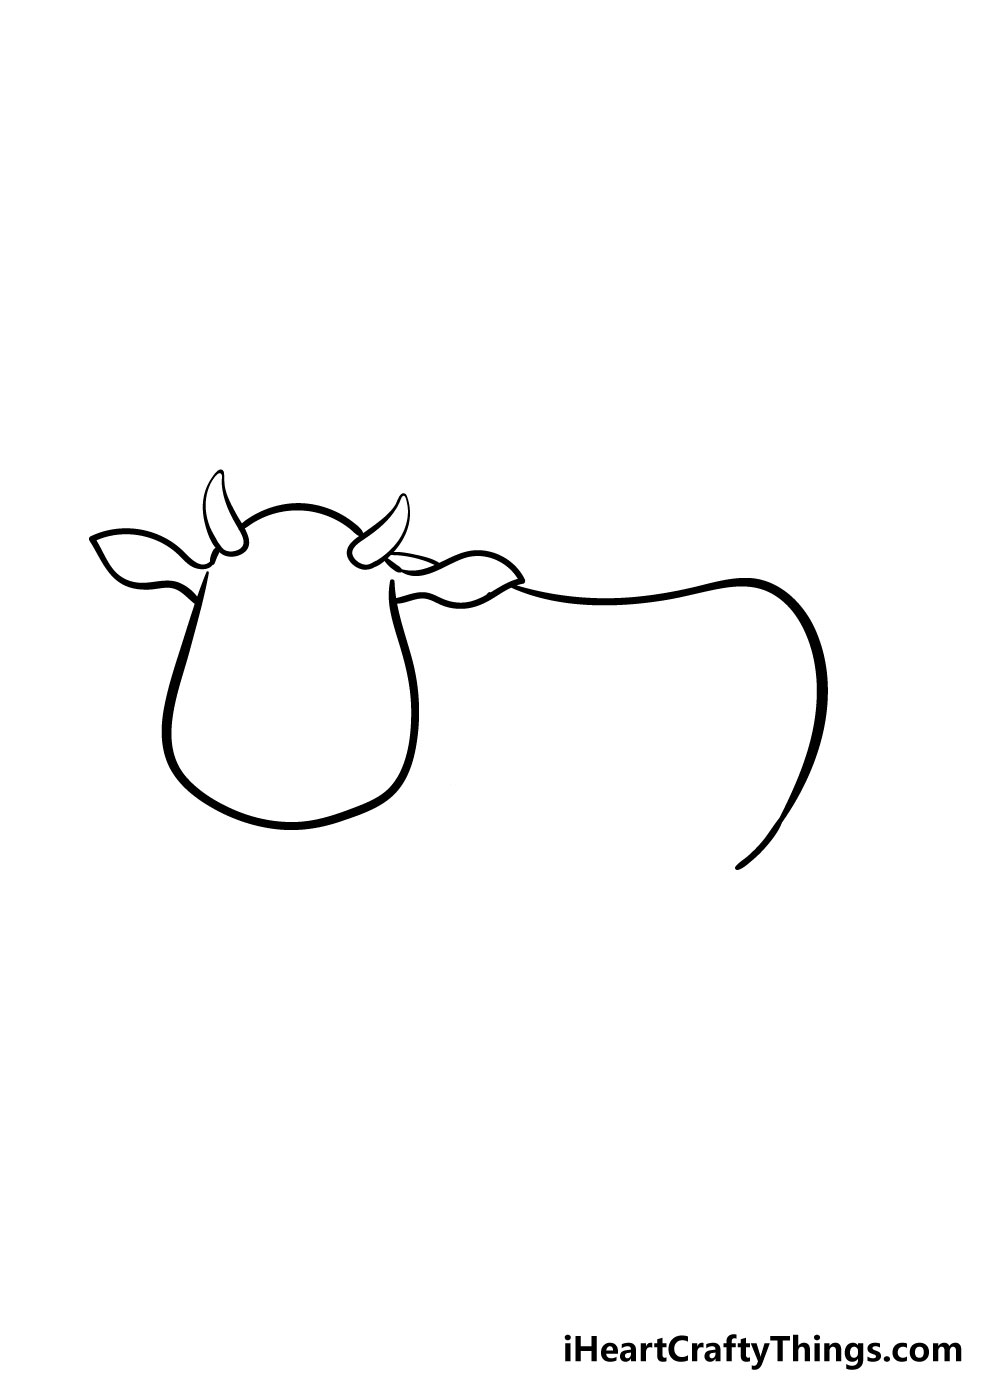 cow drawing step 4